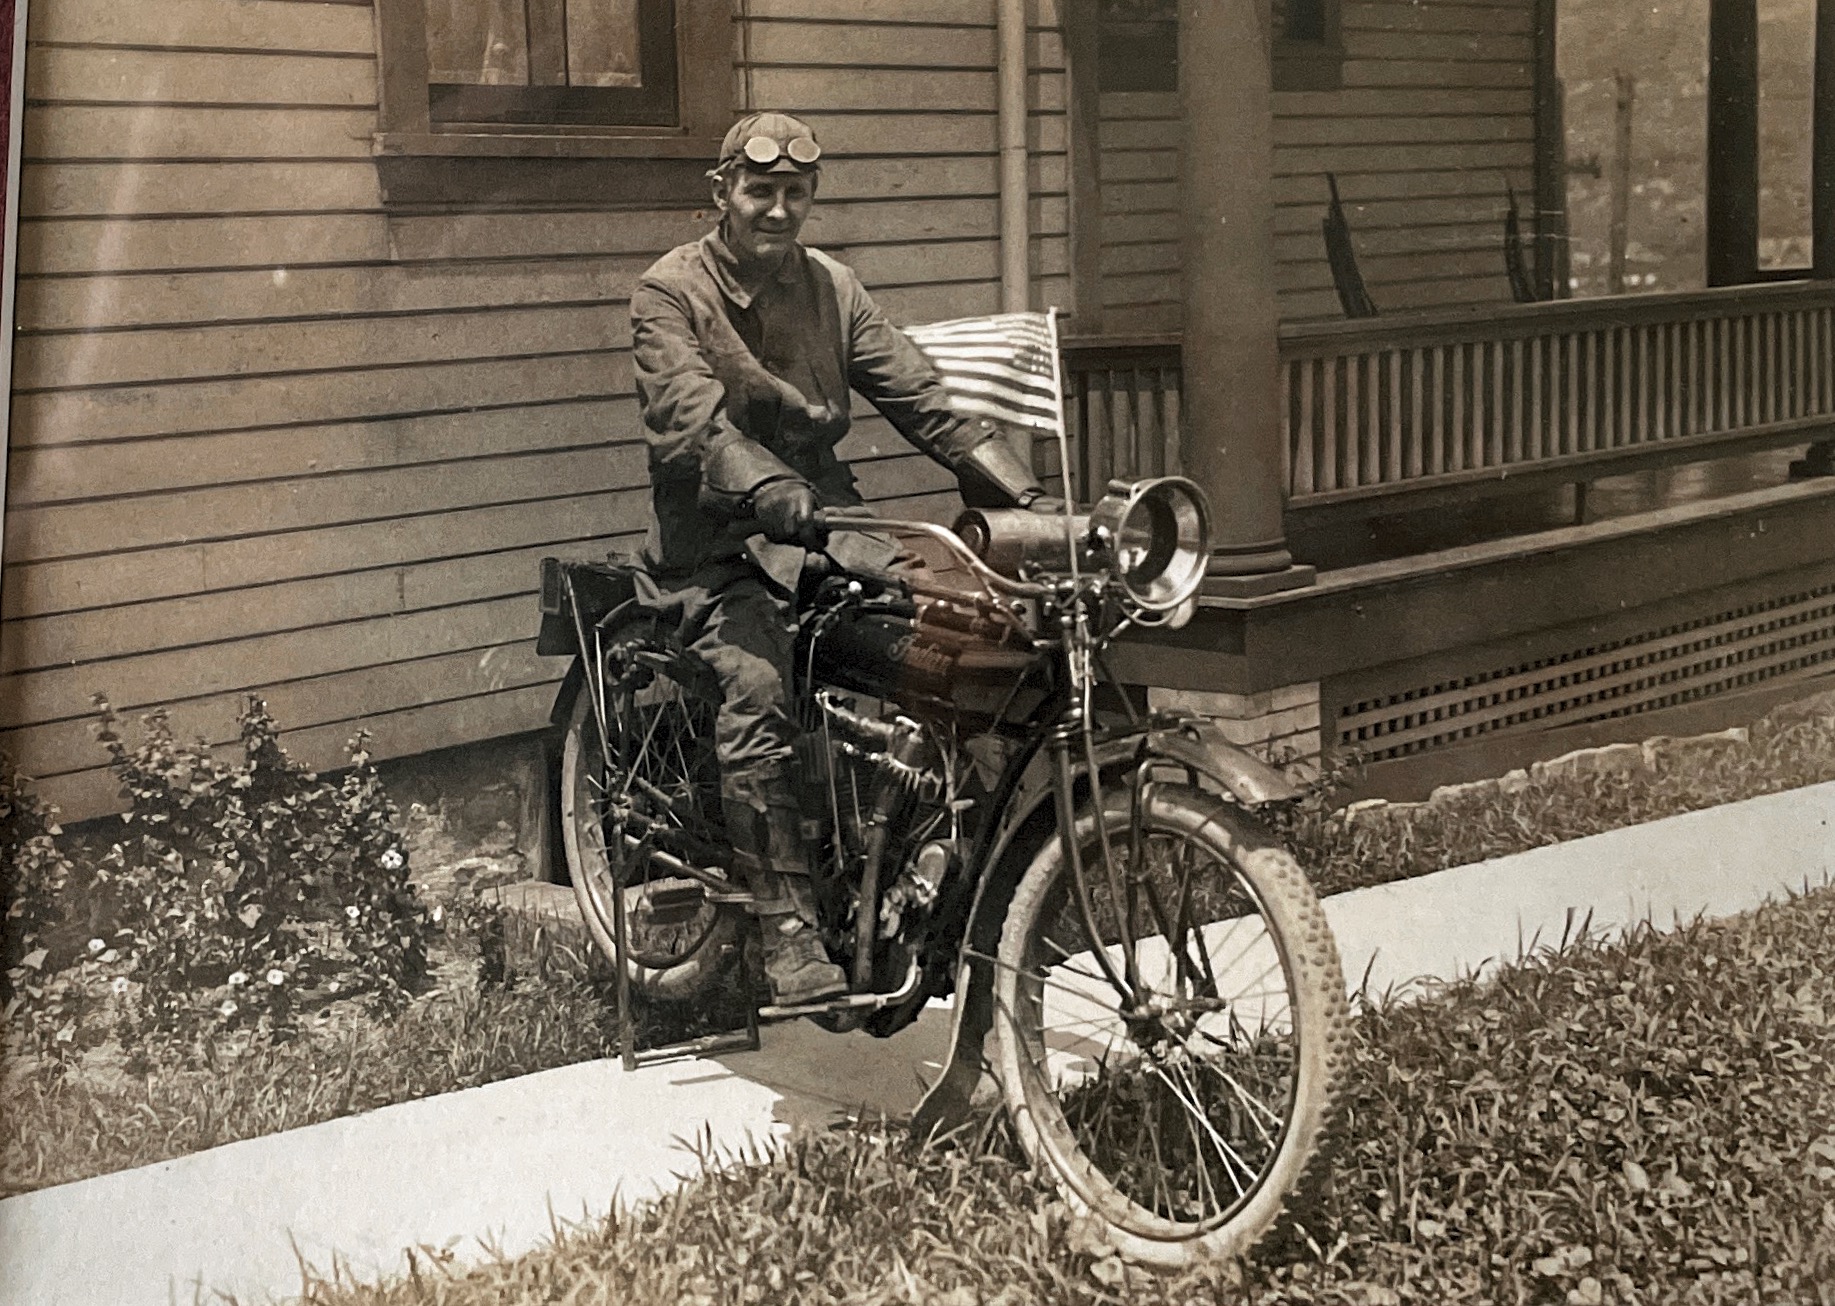 Edward John McCurdy, 1888-1954, and his motorcycle.